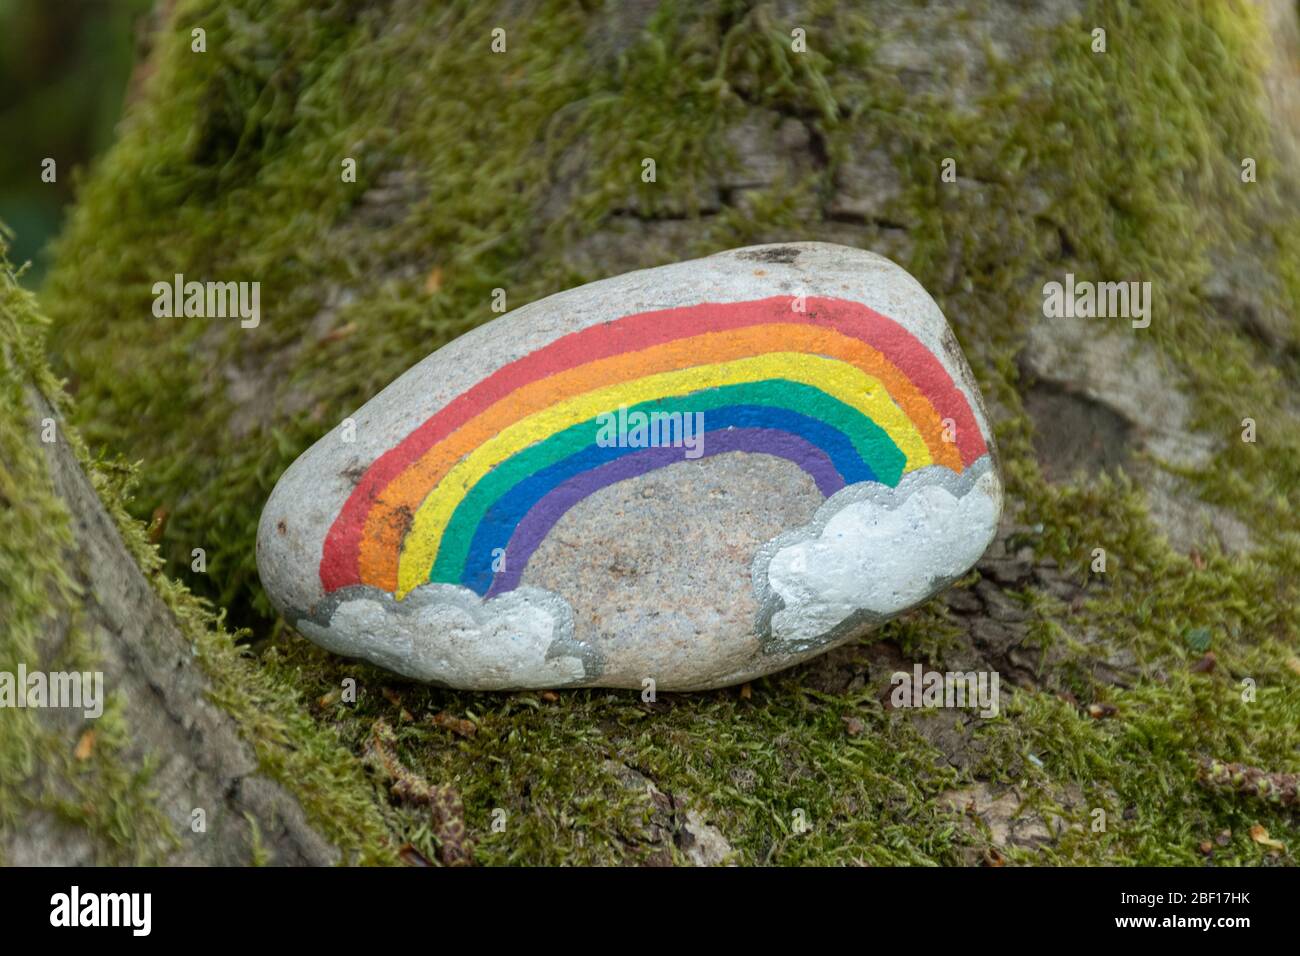 The kindness rocks project, a pebble painted with a rainbow in the woods during the coronavirus covid-19 pandemic, UK Stock Photo